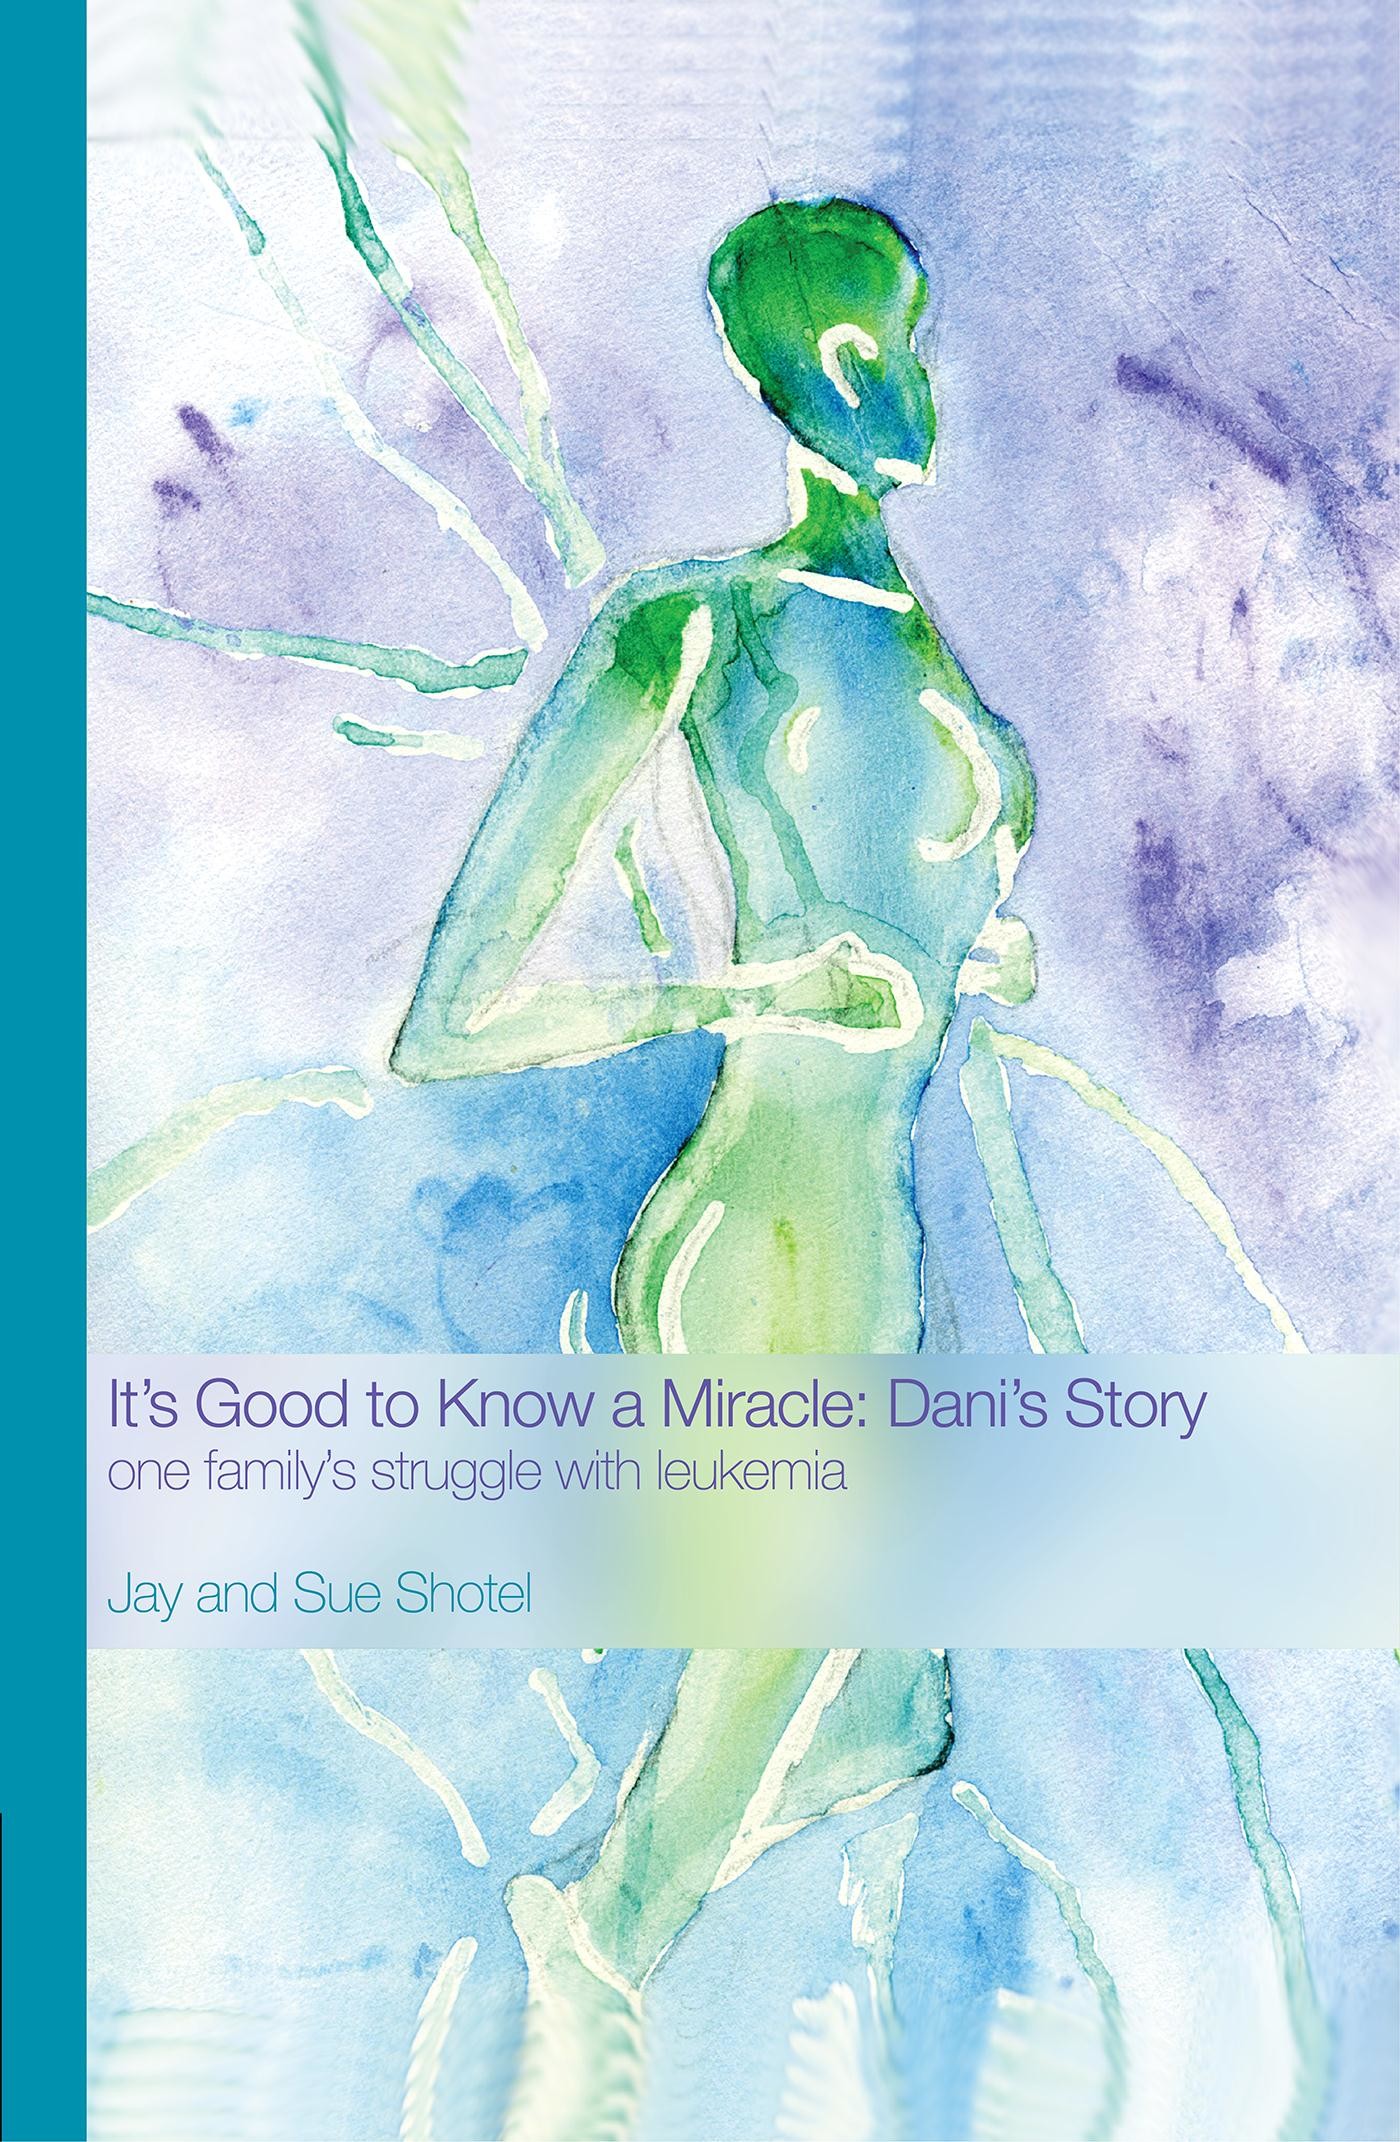 It's Good to Know a Miracle: Dani's Story